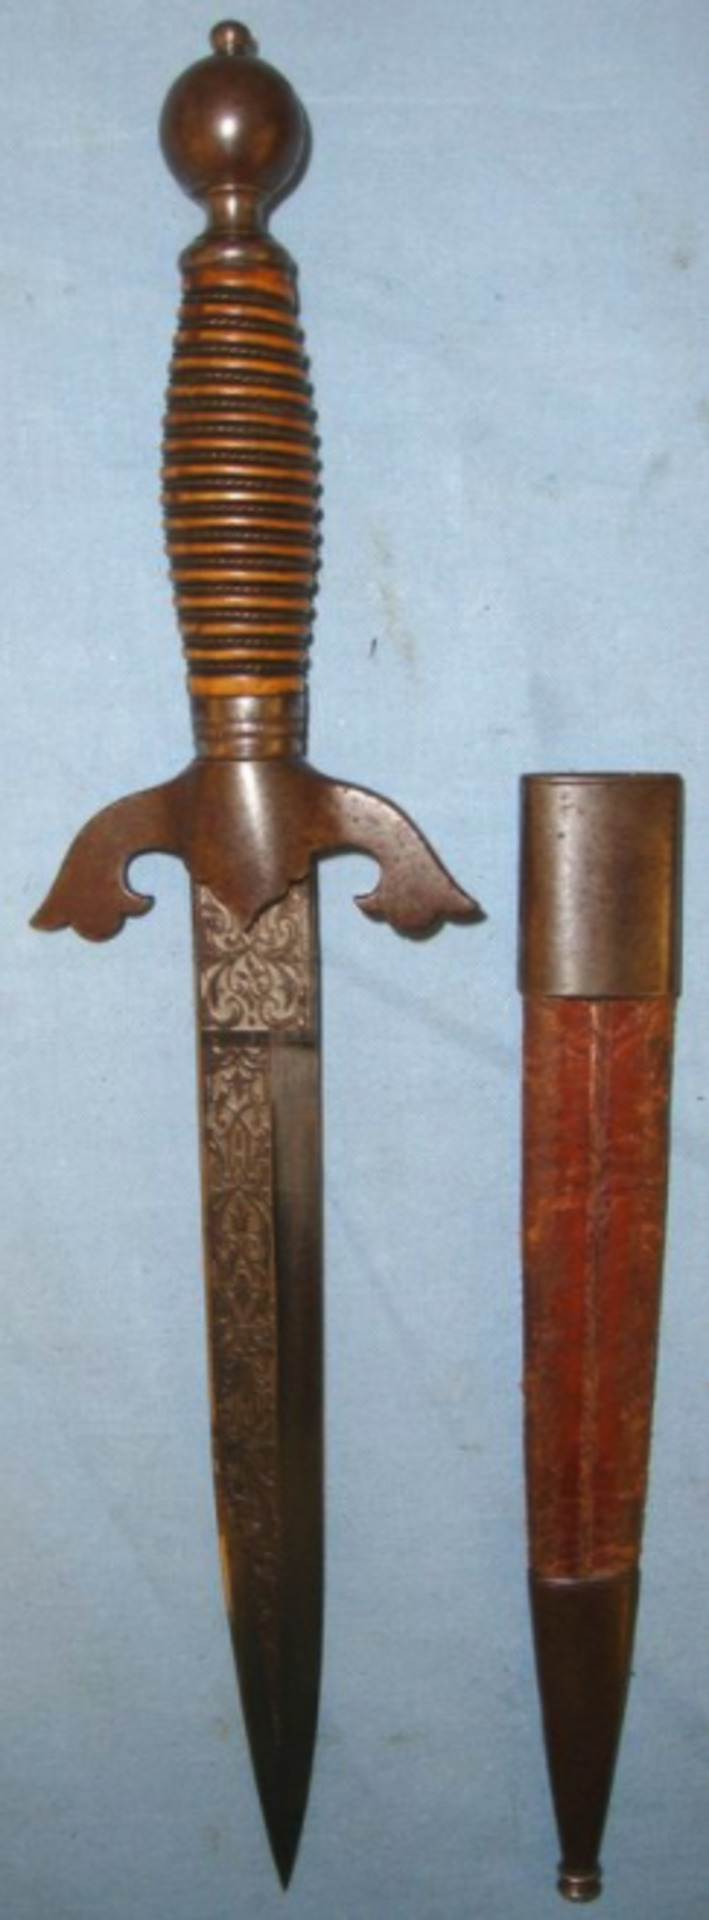 A Victorian Renaissance Form Prostitute’s Dagger With Spanish Toledo Blade & Scabbard. - Image 2 of 3